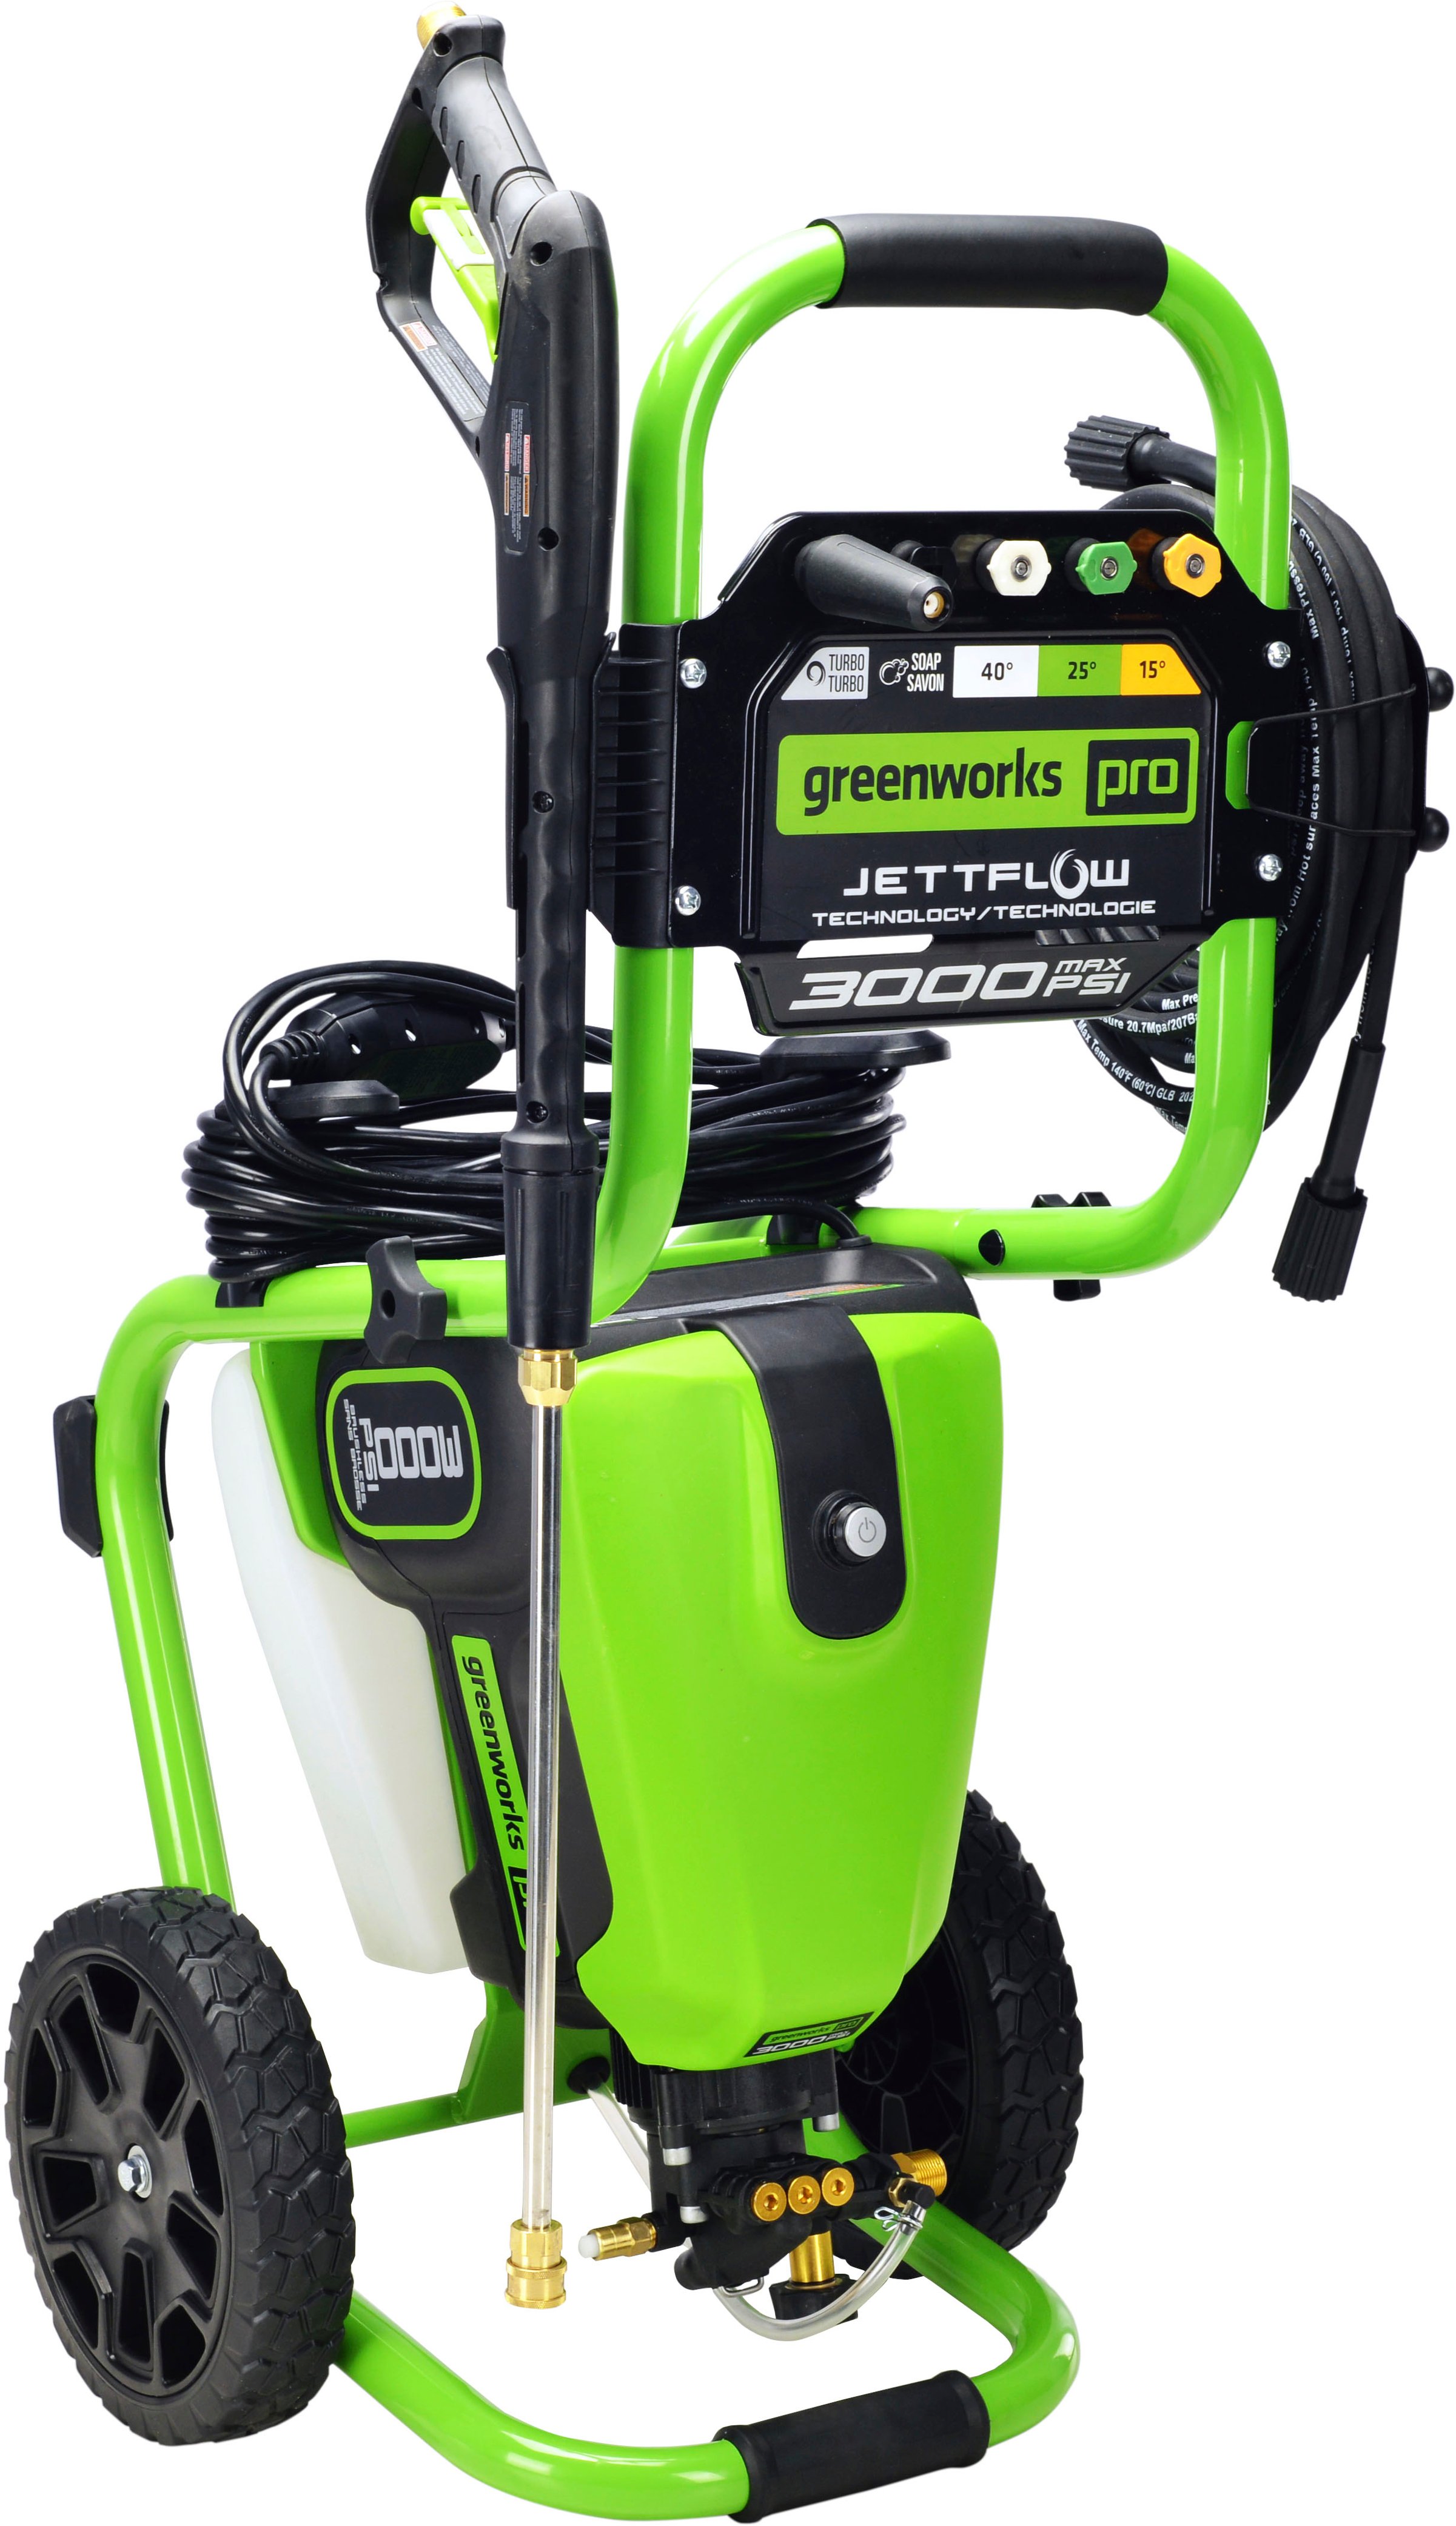 Greenworks Pro Electric Pressure Washer up to 3000 PSI at 2.0 GPM